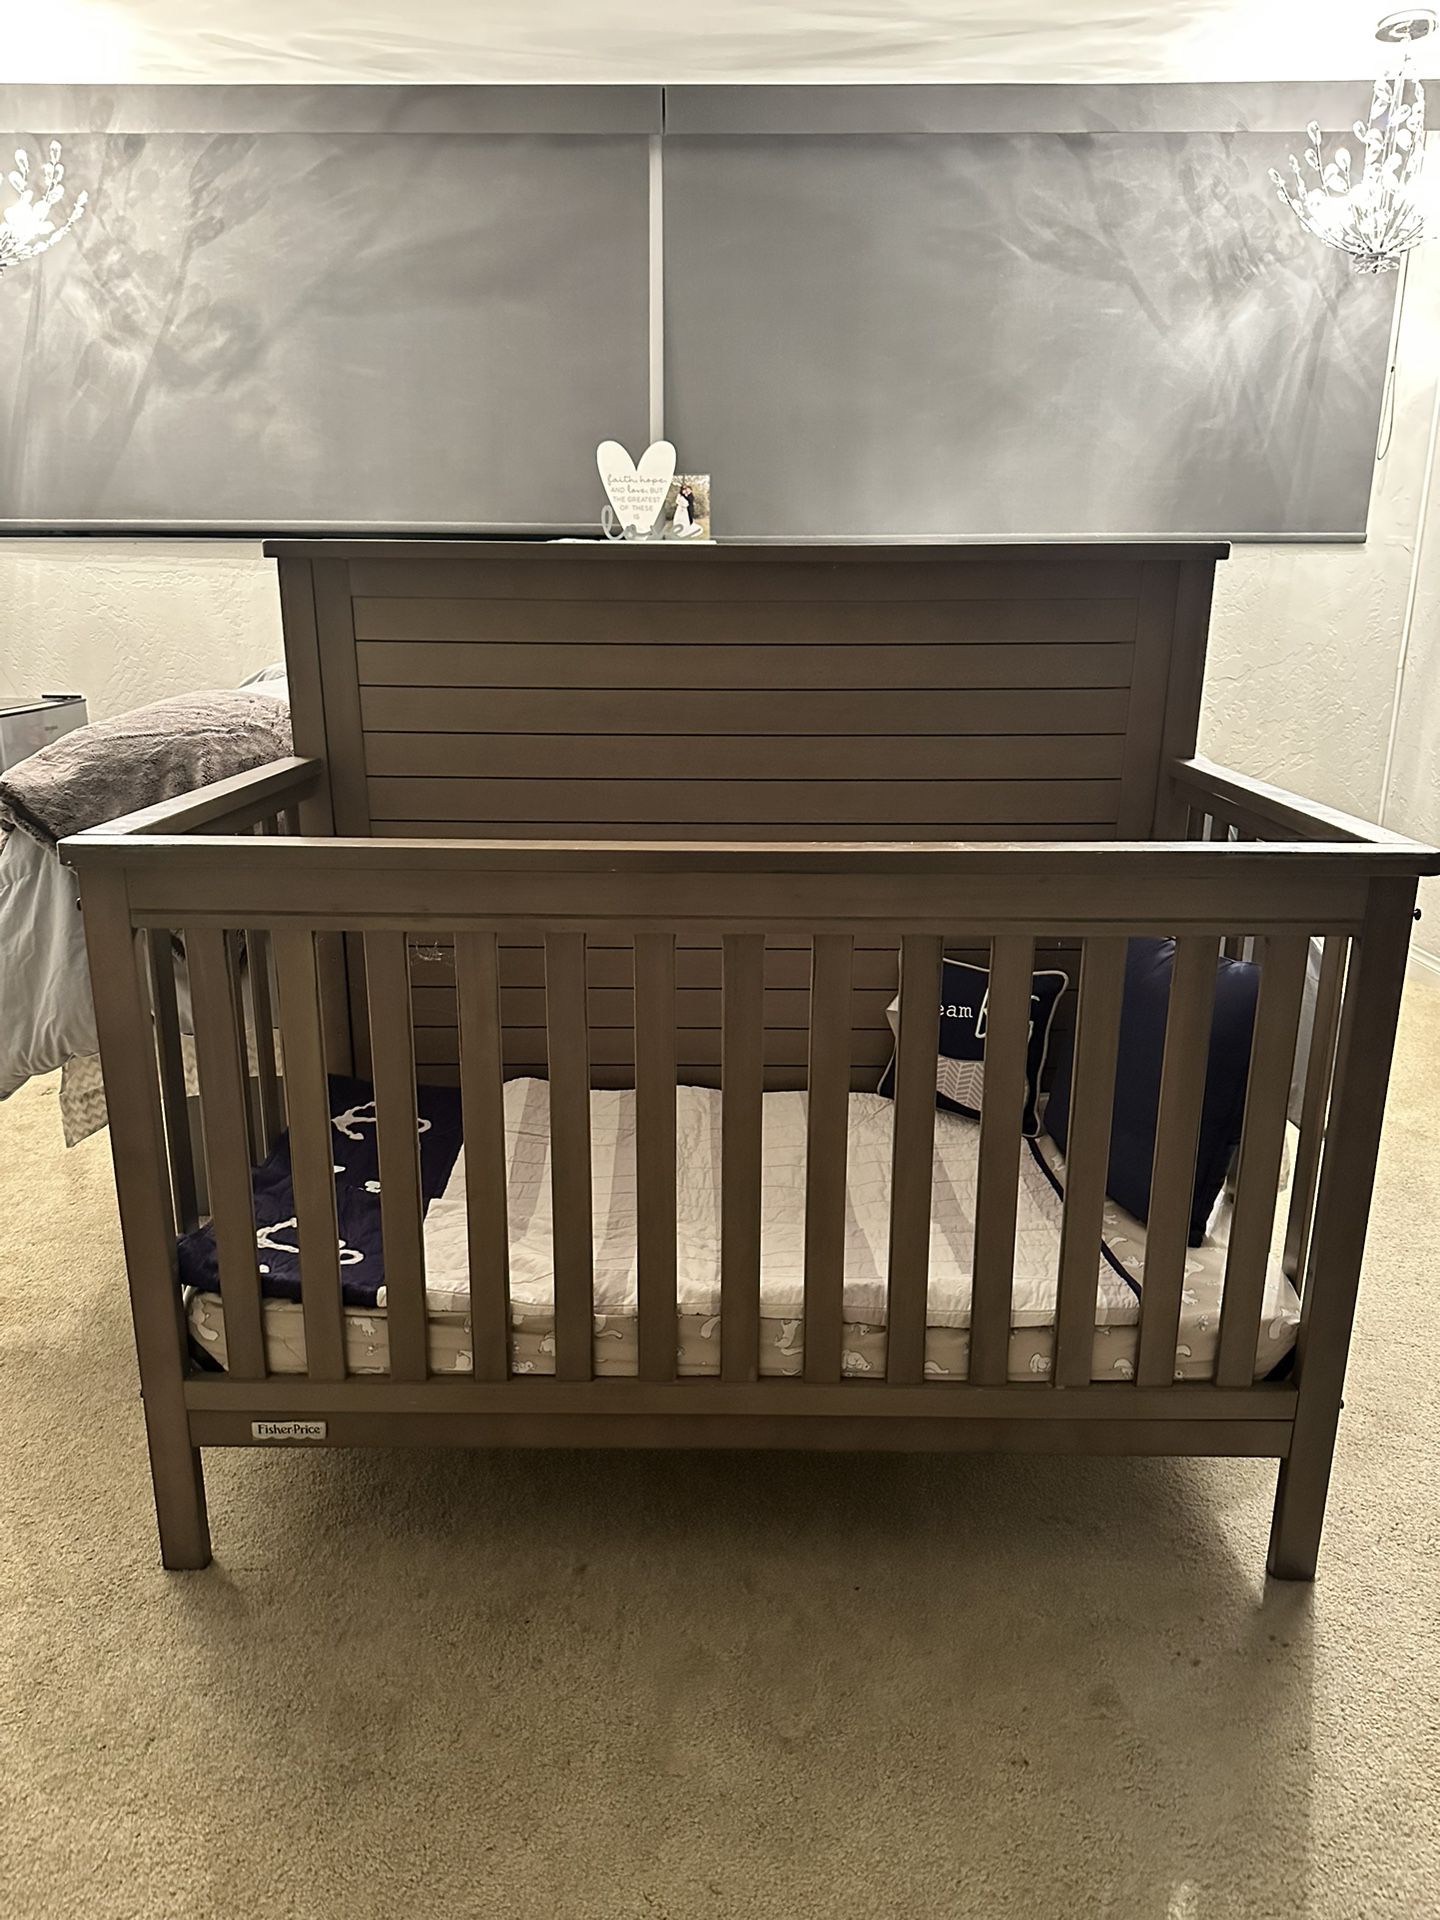 Like New Crib & Growing to Toddler Bed In Gray. So Modern & Very Useful To Change As They Grow